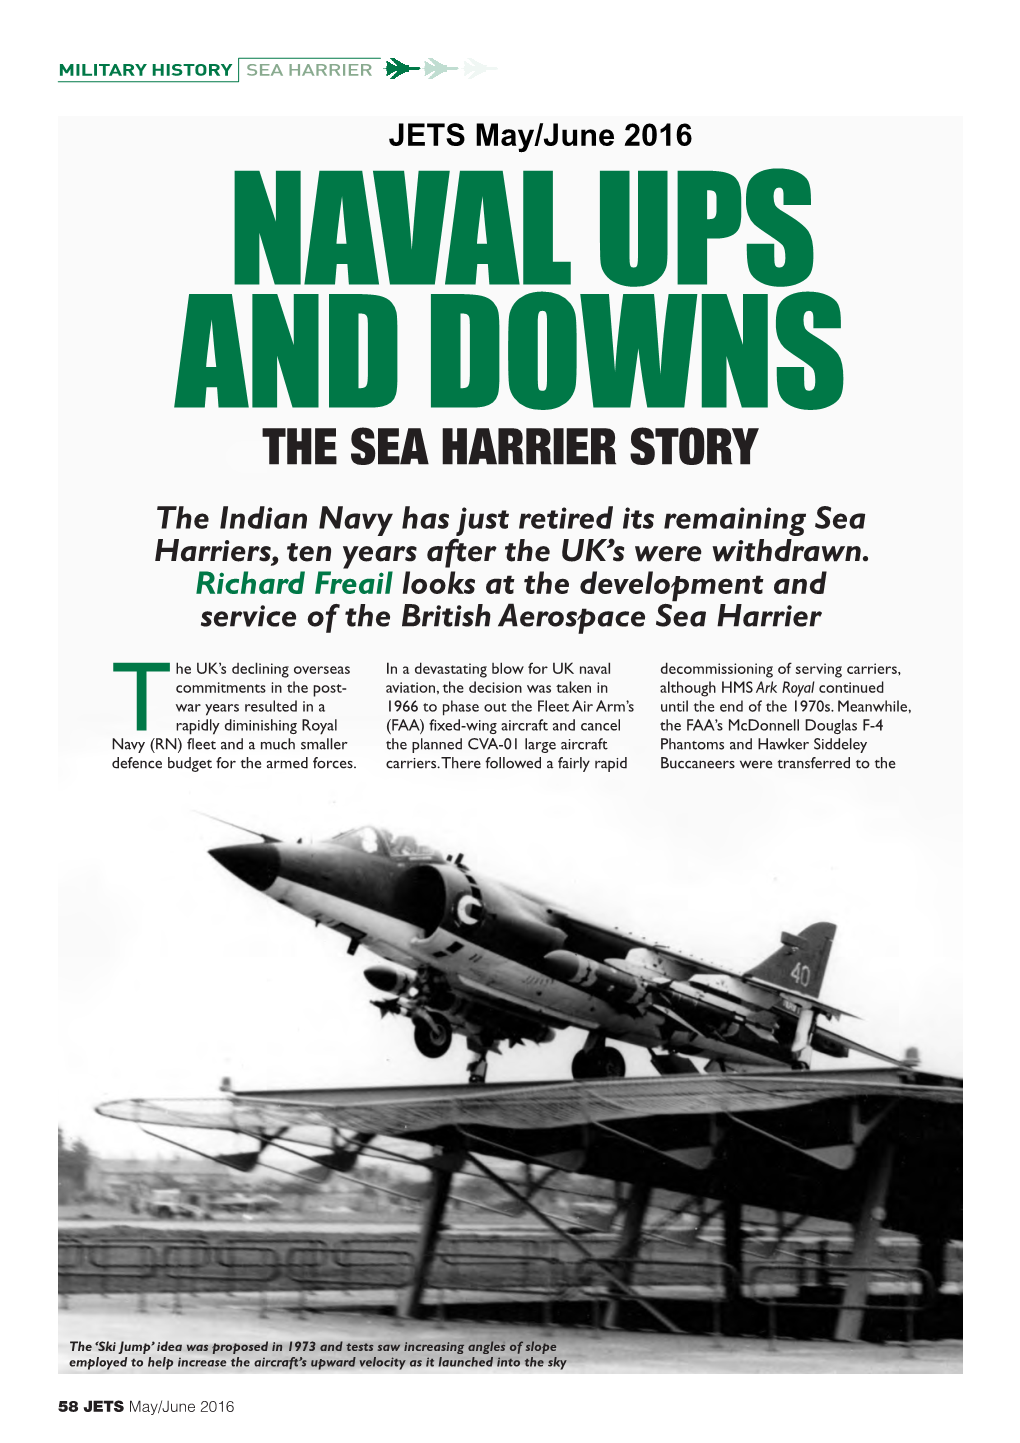 The Sea Harrier Story